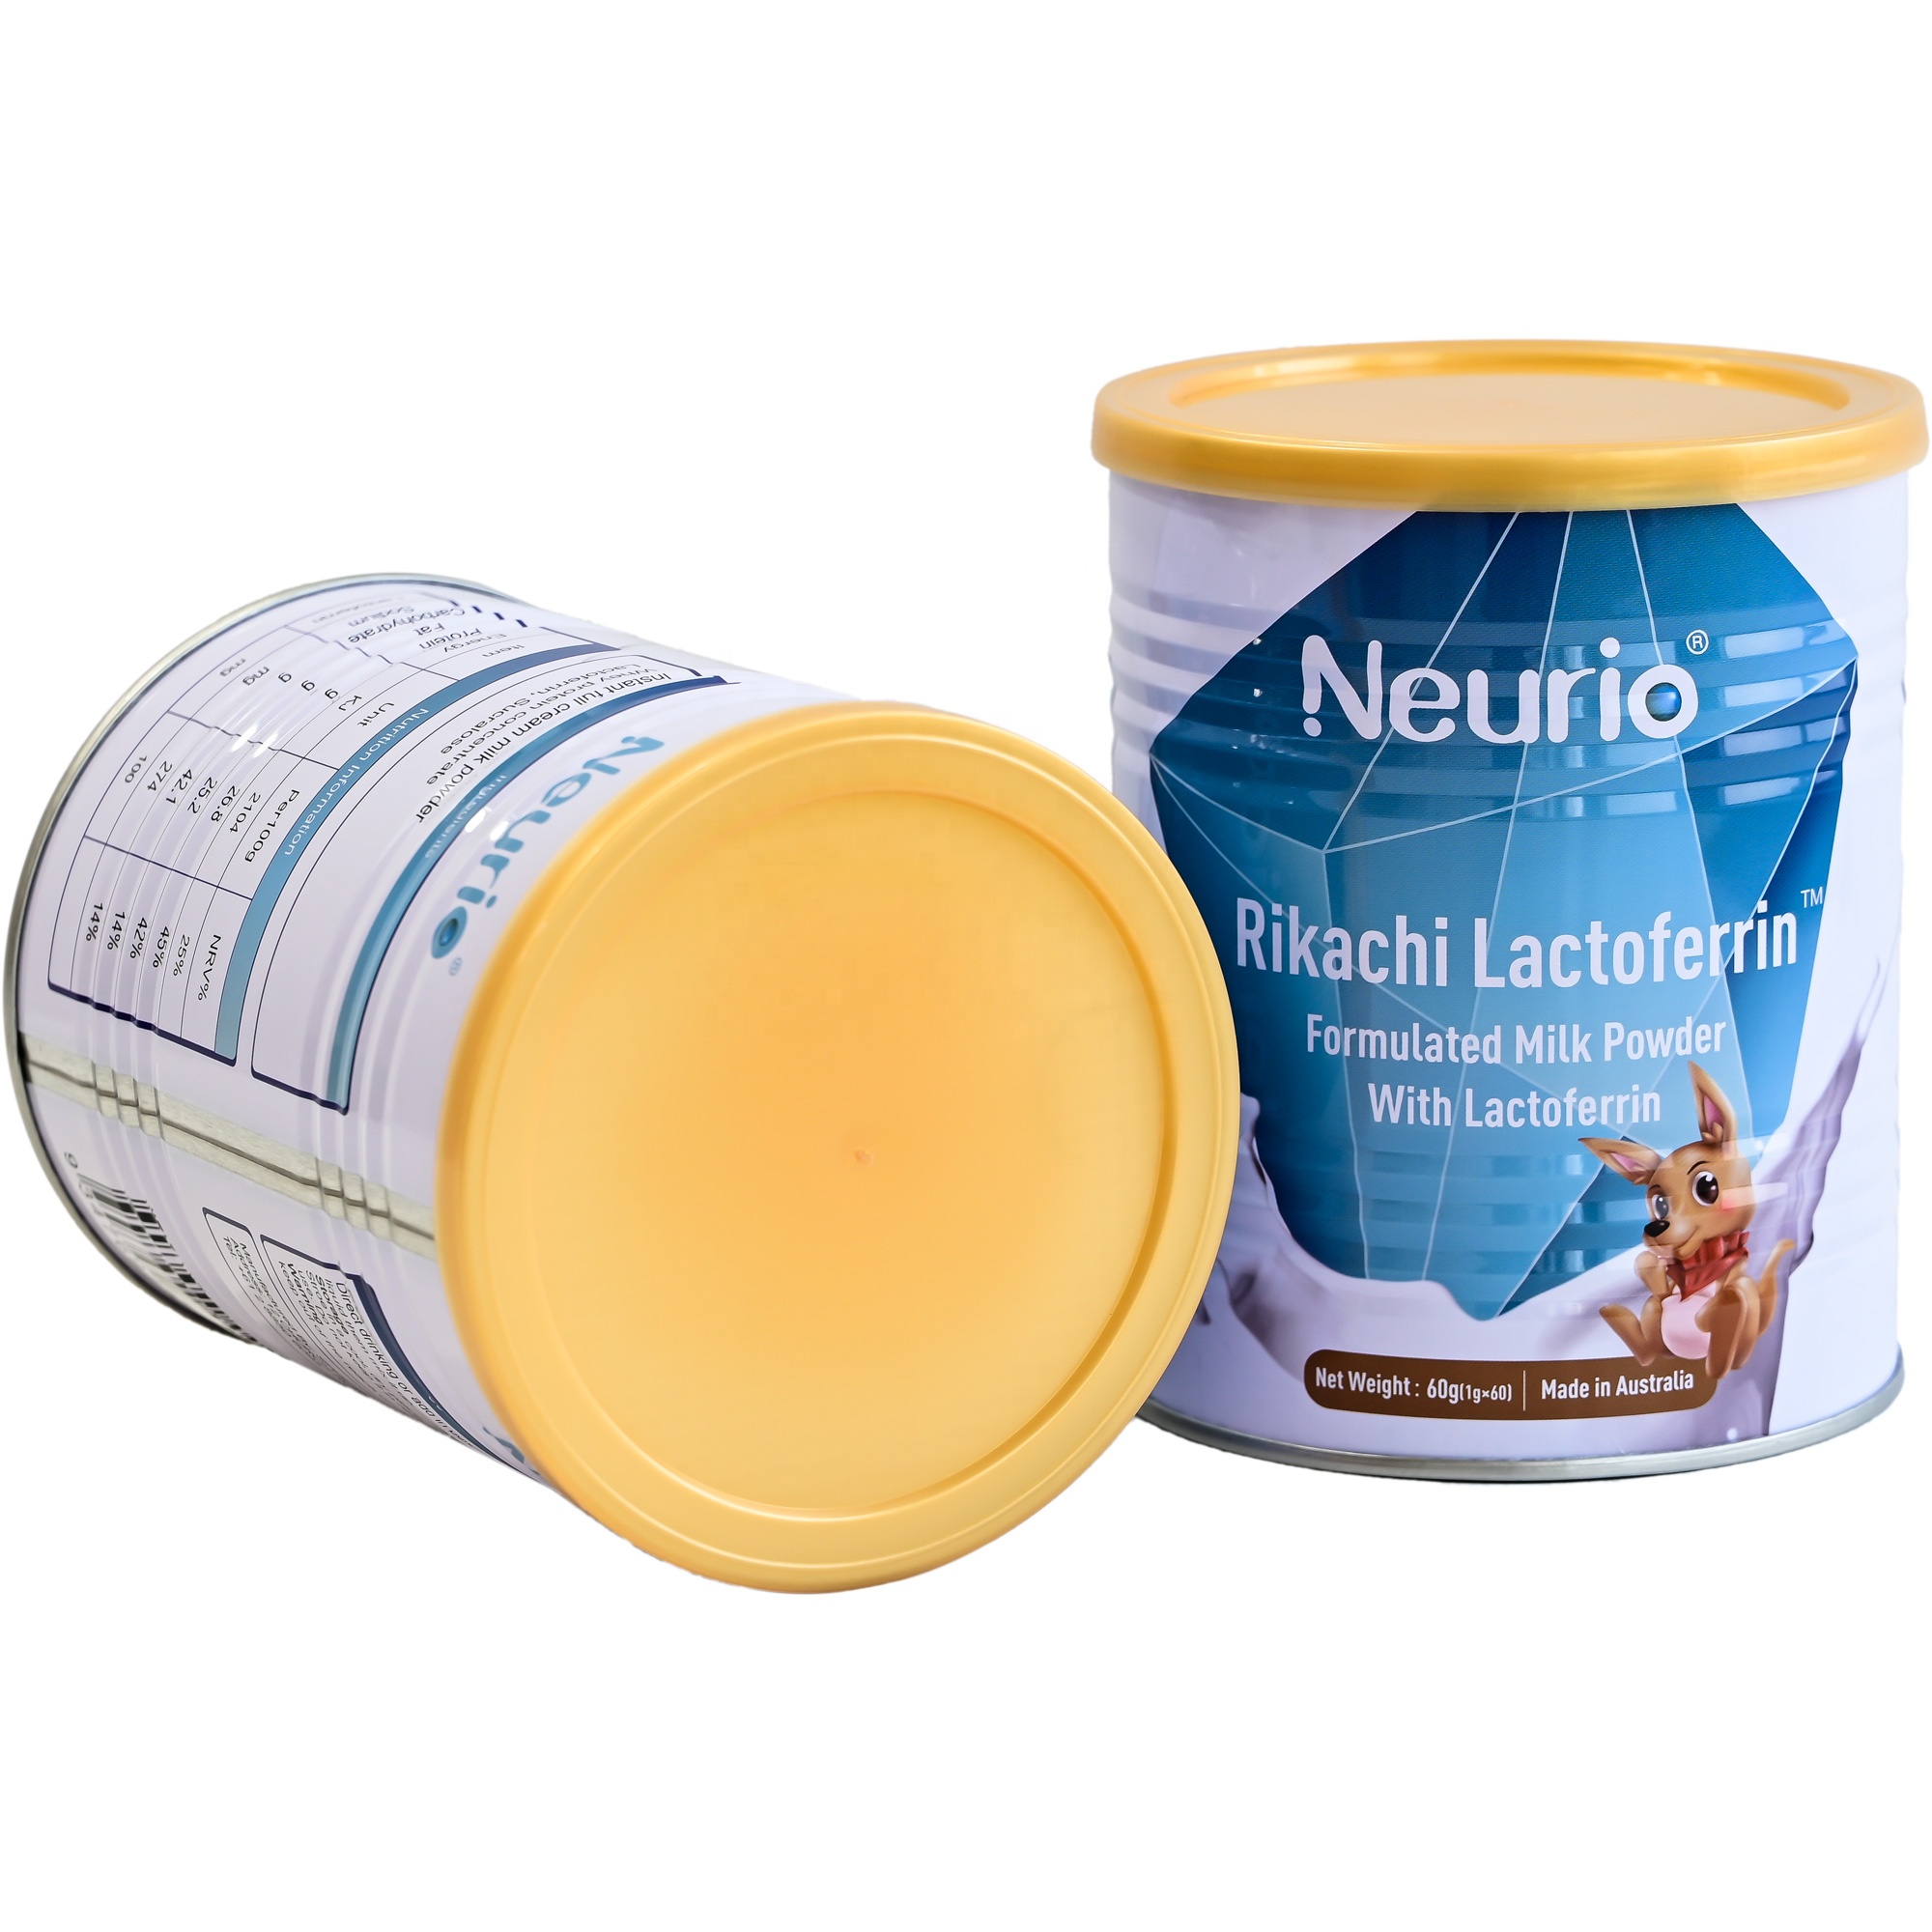 Manufactured for easy carrying independent sachets from Australia lactoferrin baby formula milk powder